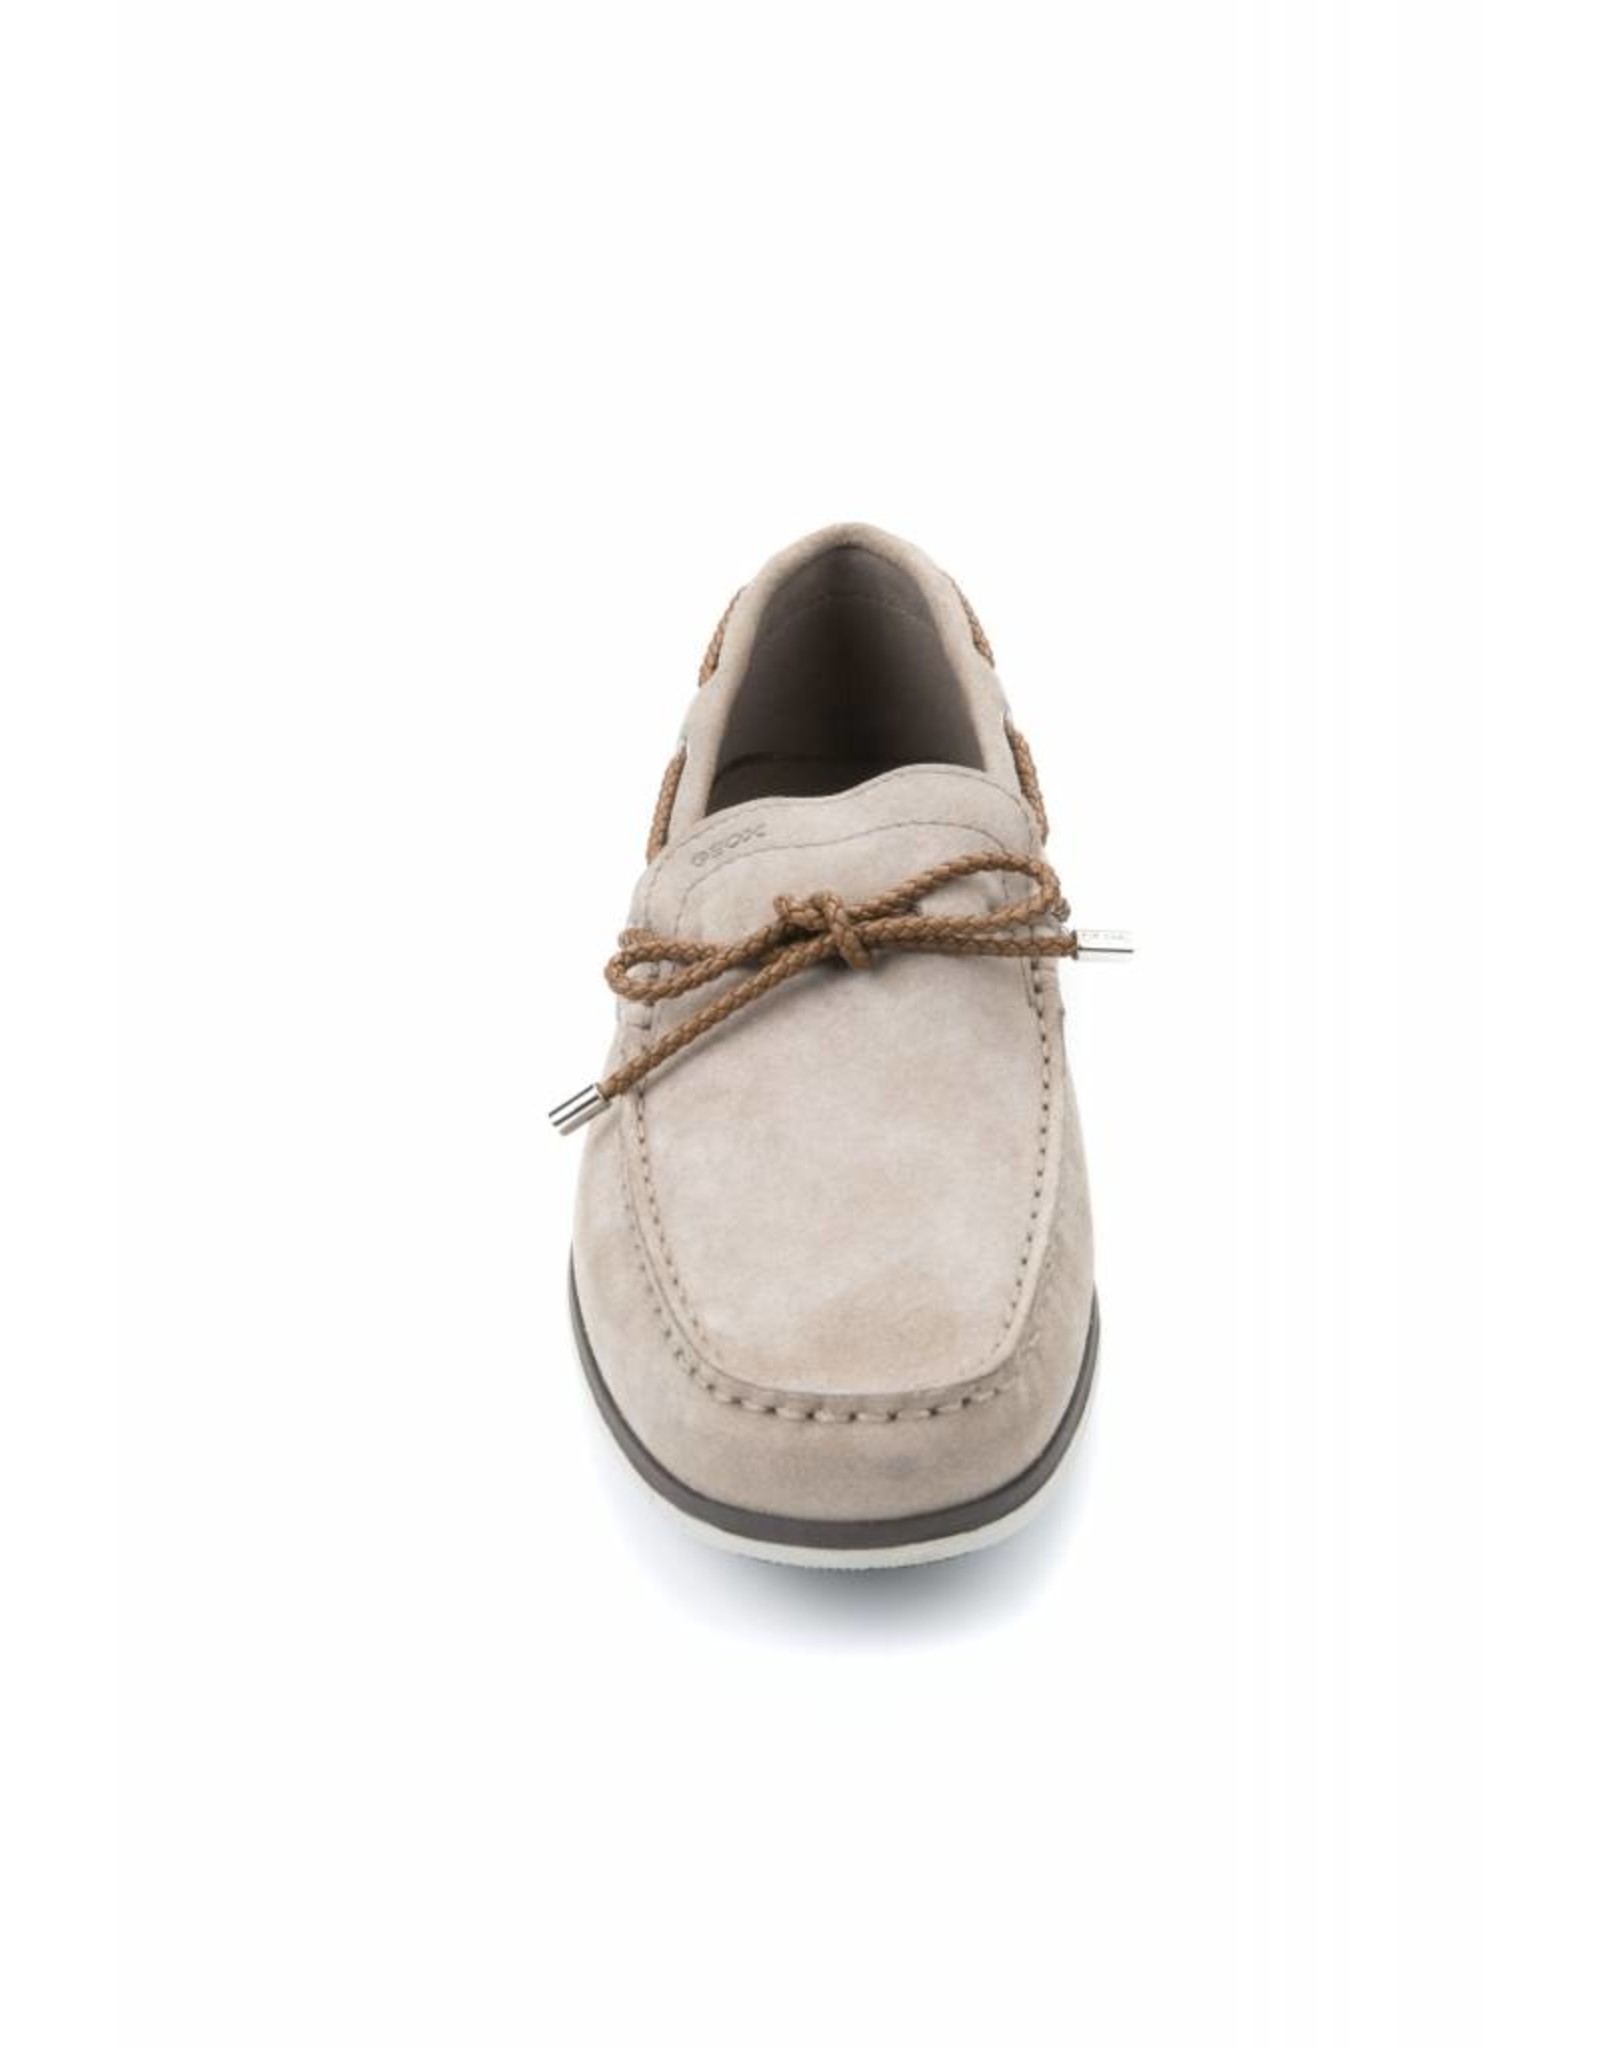 Geox Mirvin Moccasin